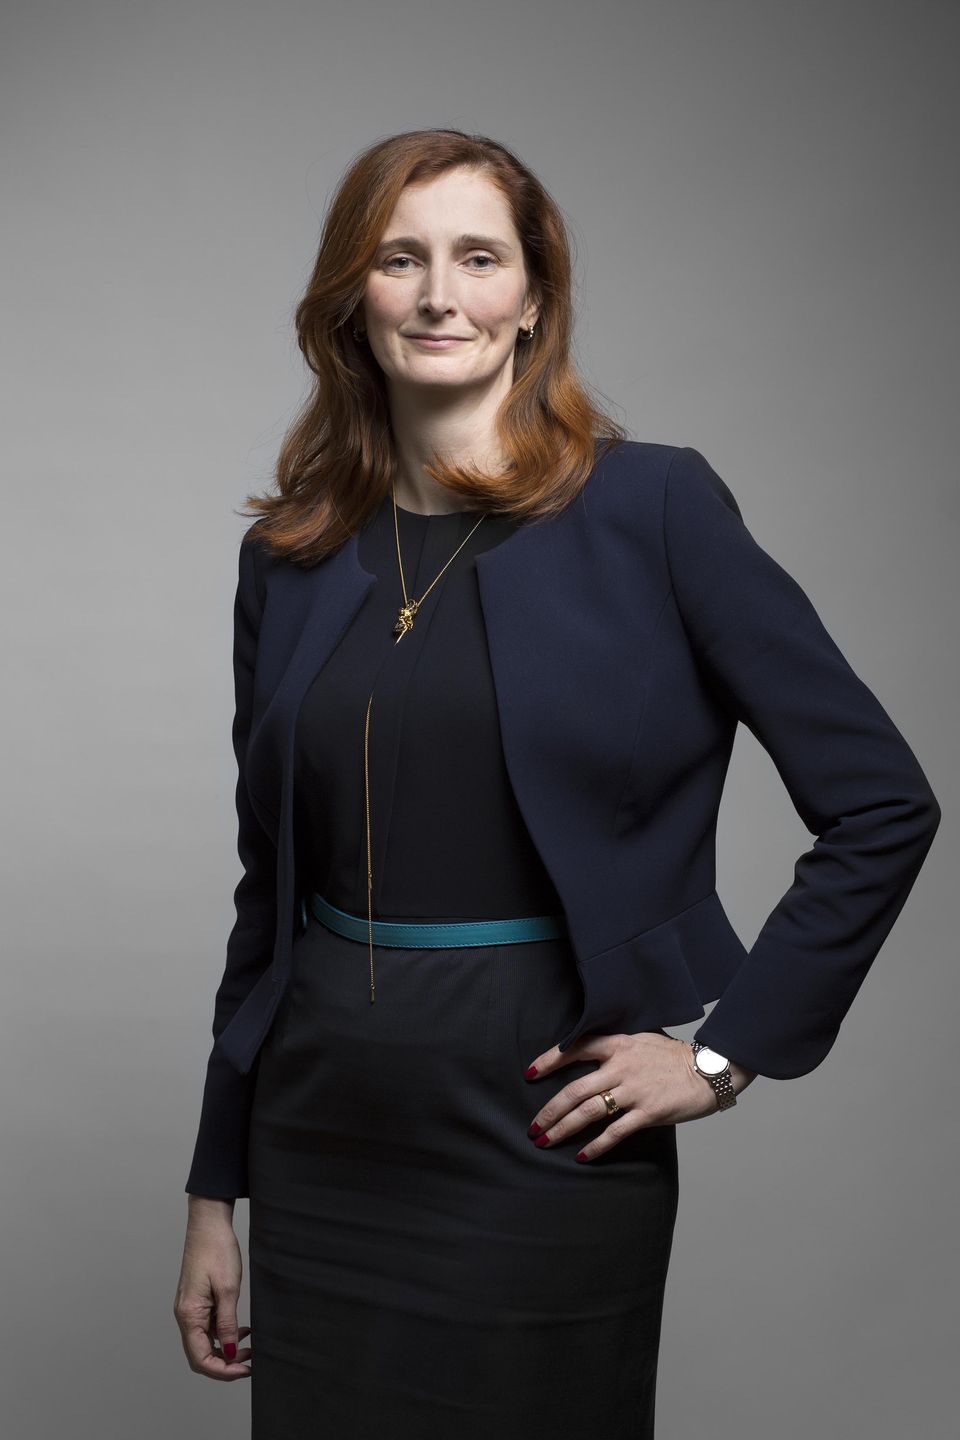 Annica Bresky started as President and CEO of Stora Enso on 1 December 2019.